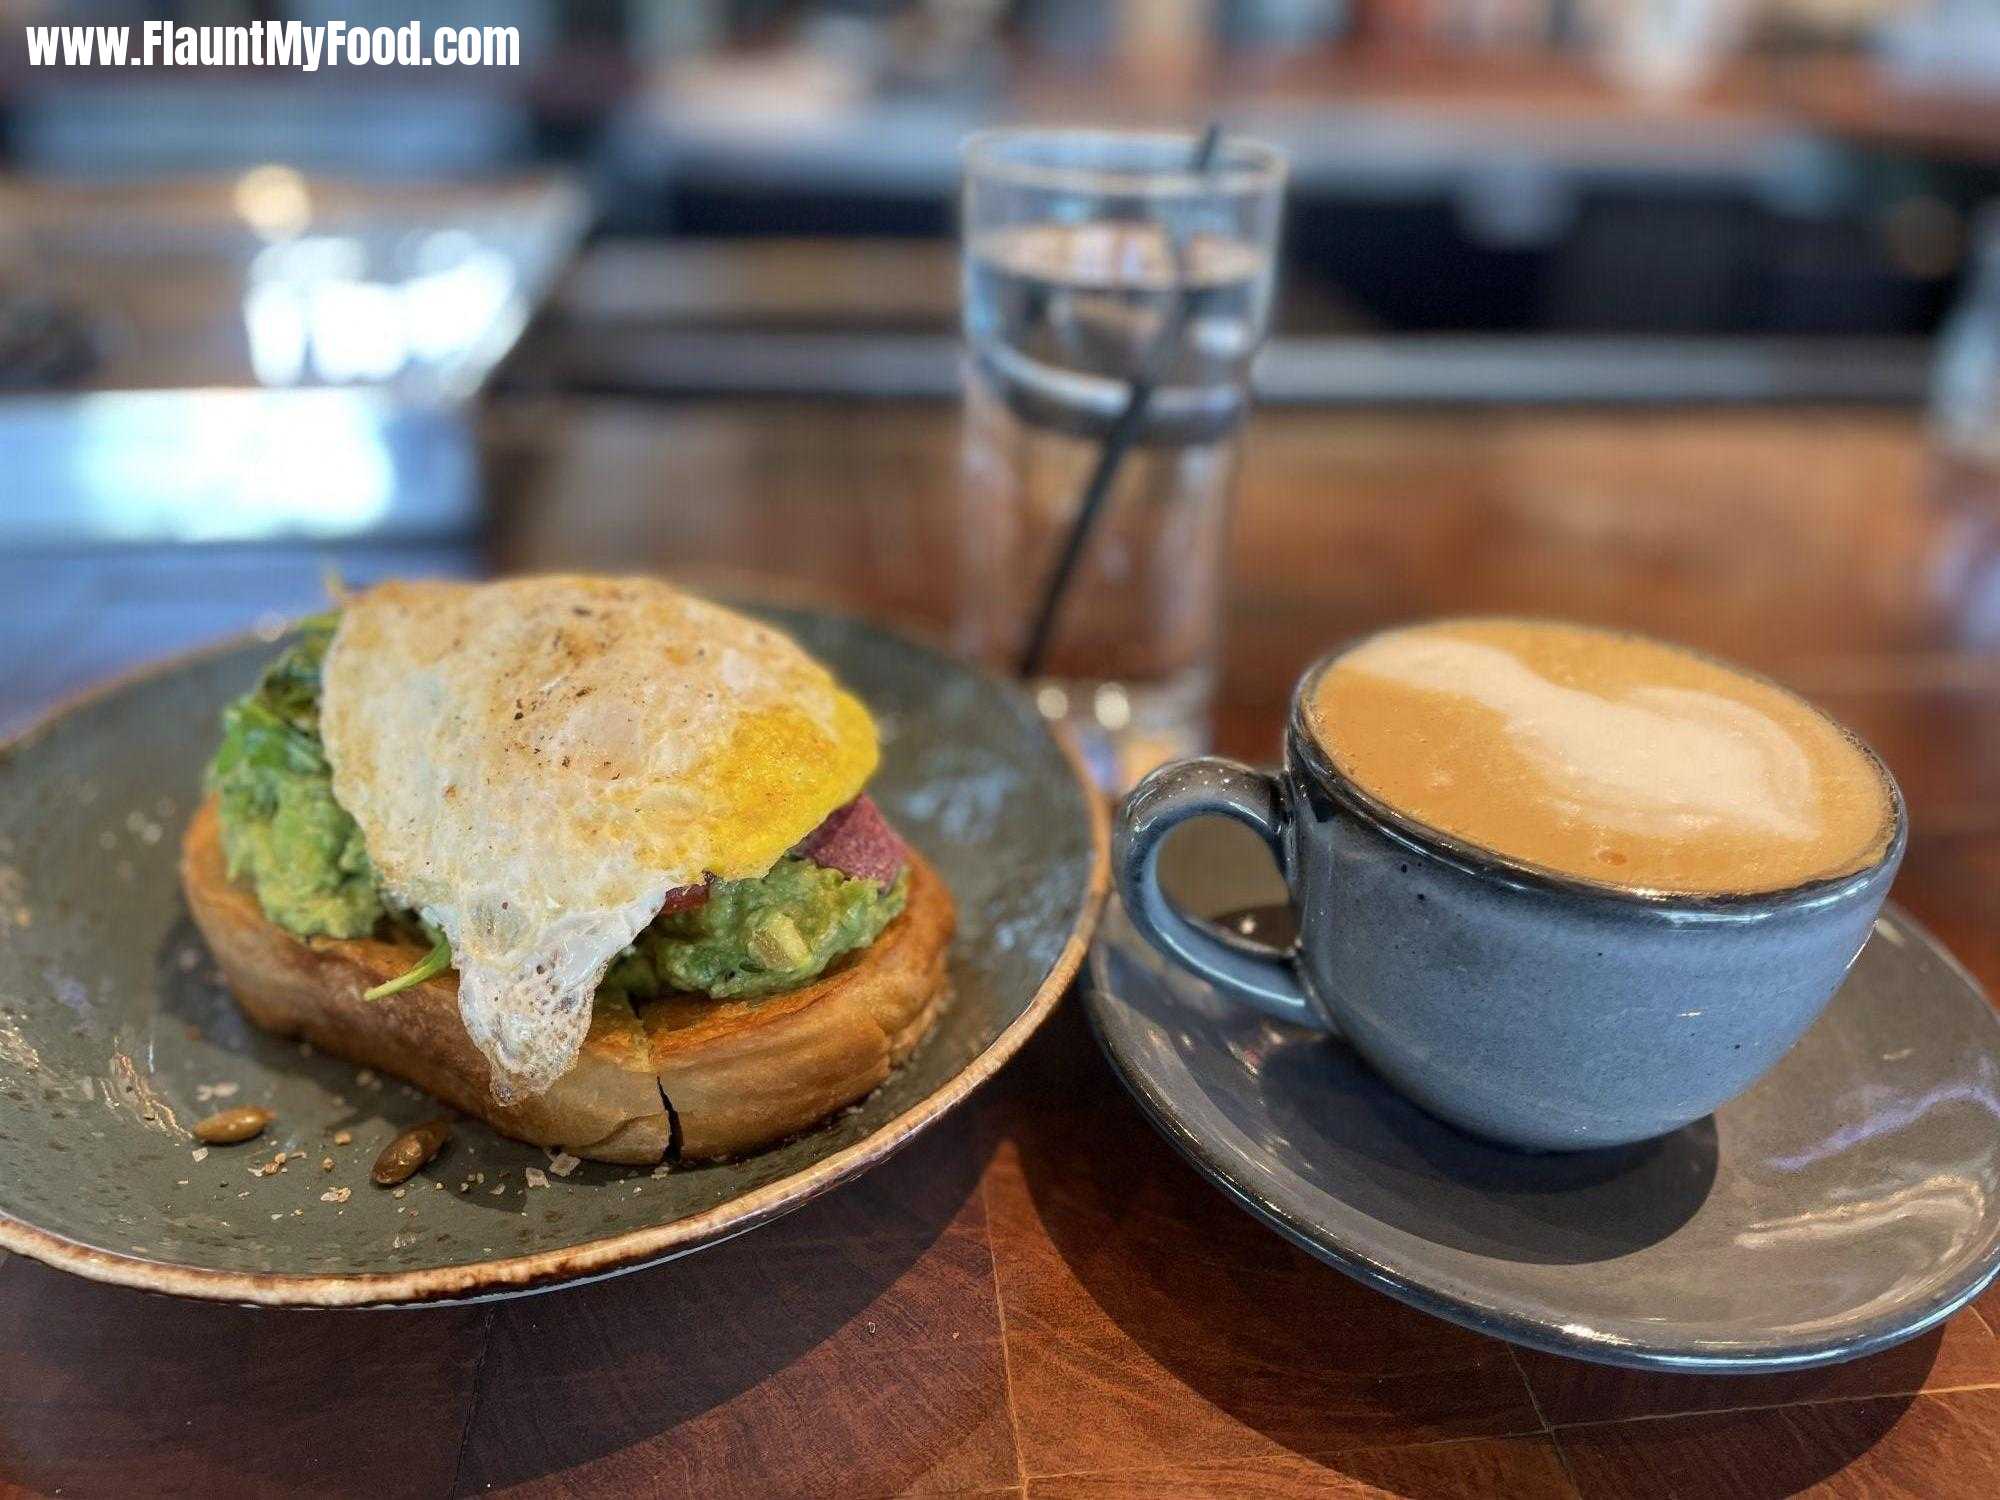 Avocado Toast with an Egg over Hard and a Decaf Latte at Press Cafe in Clearfork Fort Worth TexasAvocado Toast with an Egg over Hard and a Decaf Latte at Press Cafe in Clearfork Fort Worth Texas